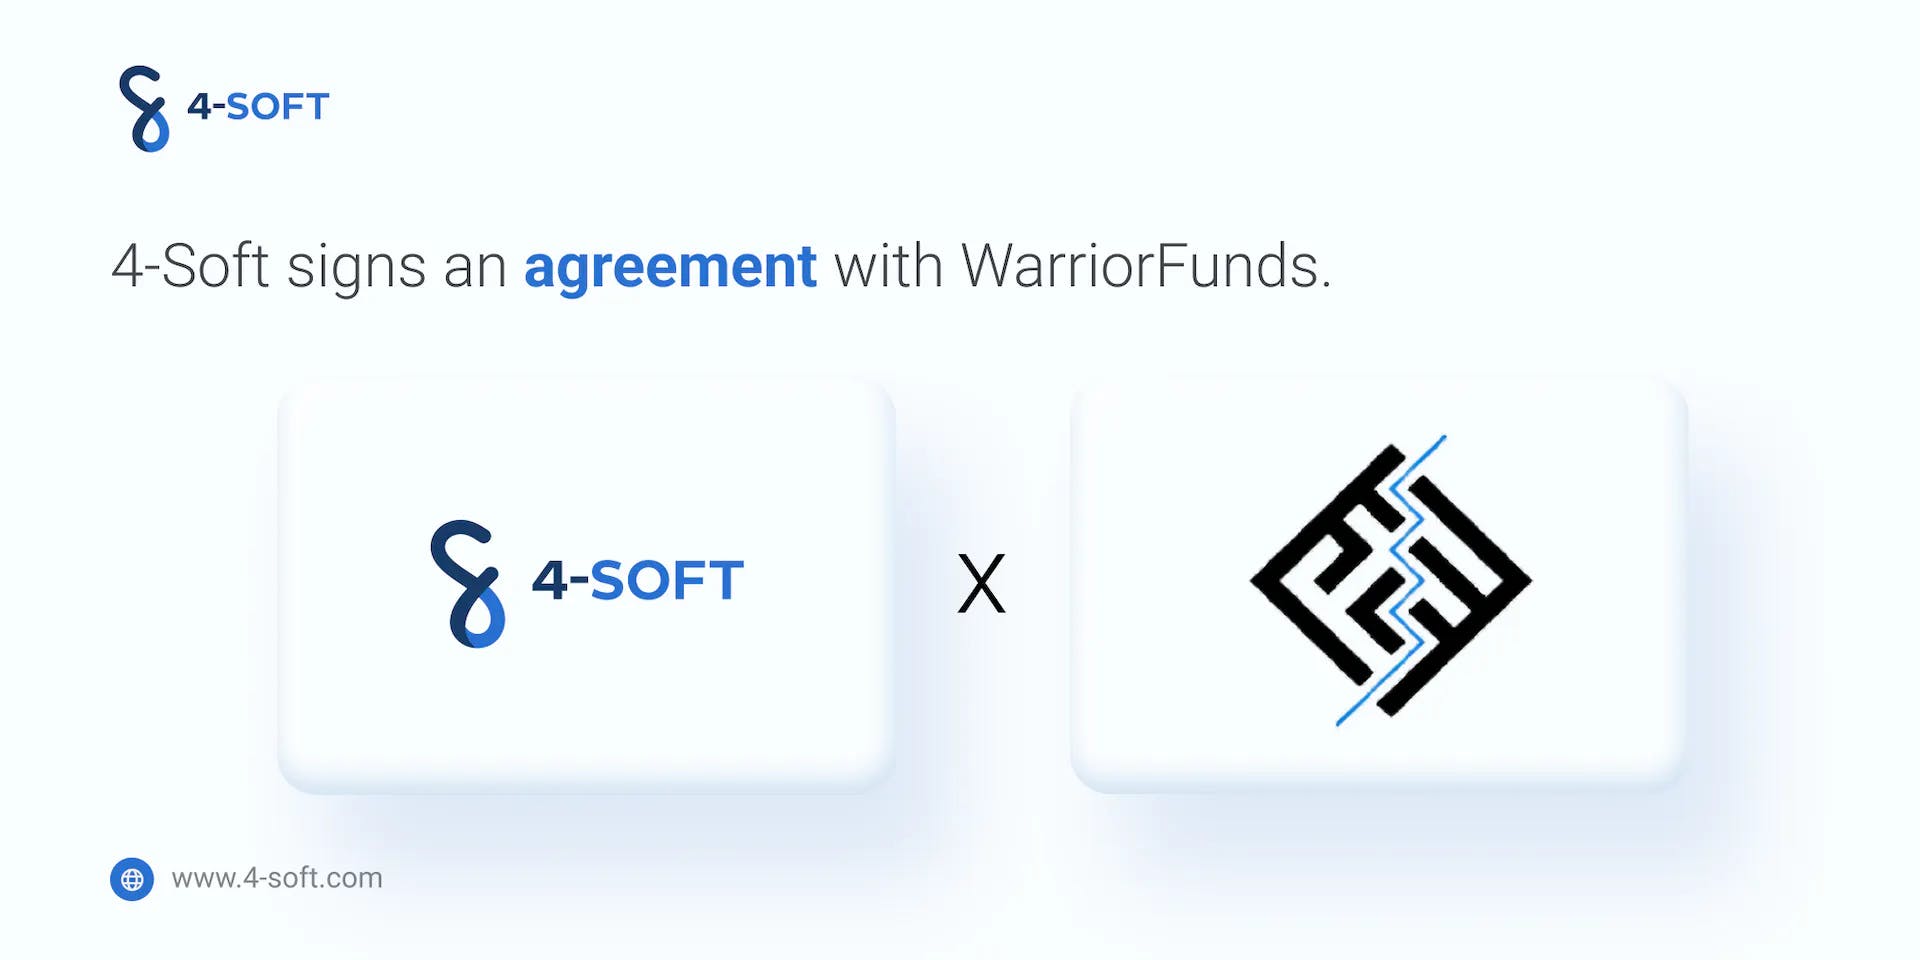 4-Soft and WarriorFunds inks partnership agreement